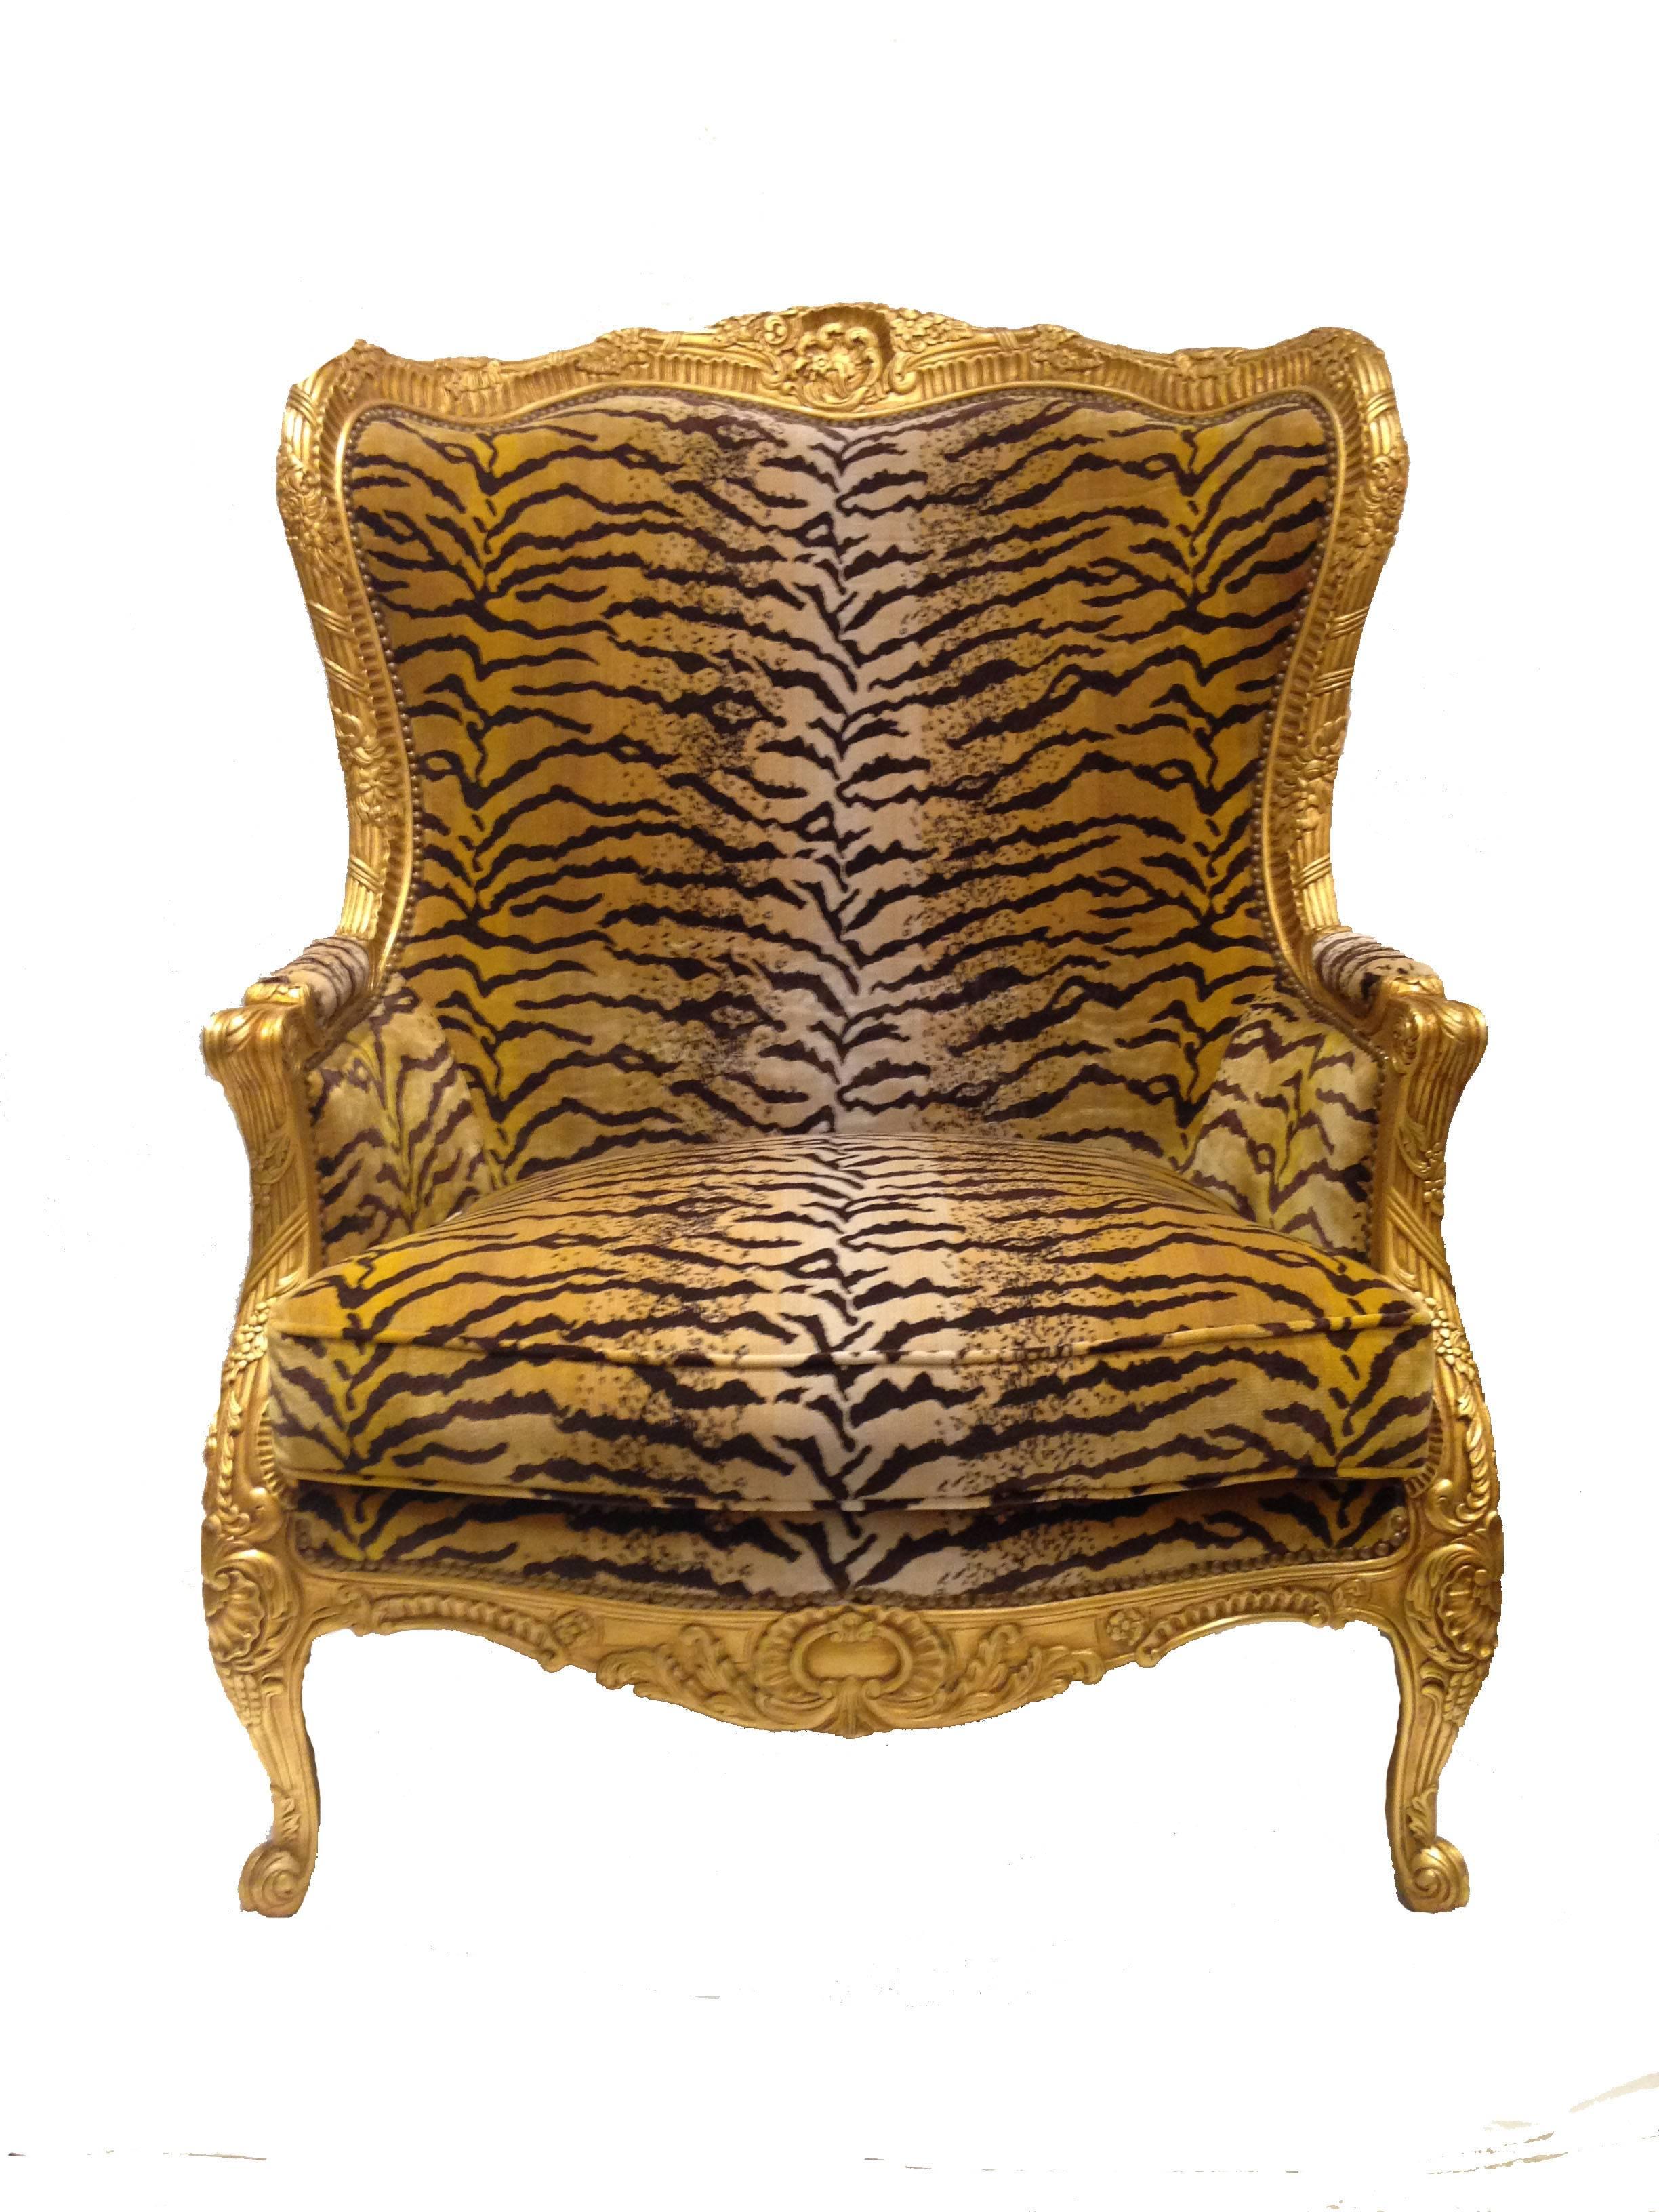 Majestic scaled, hand-carved gold leafed frame French chair. Upholstered in tiger velvet with nailhead trim. Includes two down filled matching throw pillows. 

Dimensions:
Chair: 37